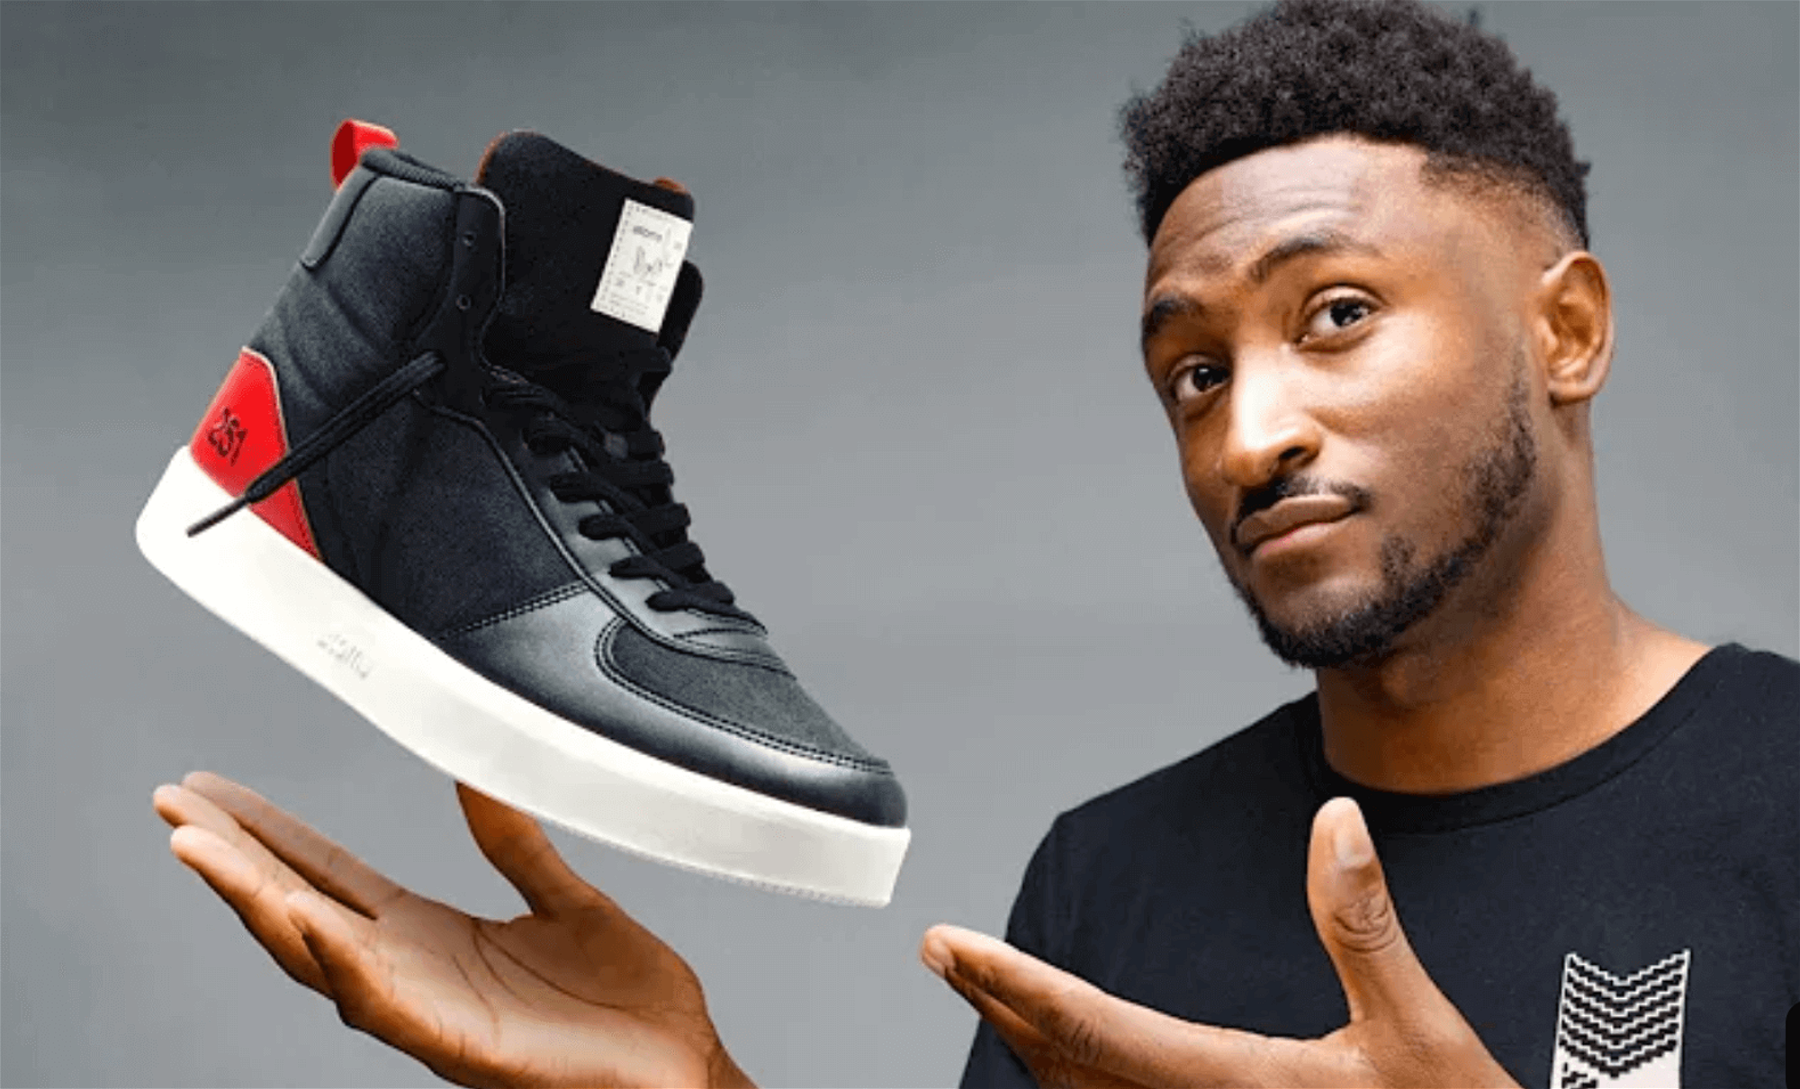 You’d think he’d finally make a phone, but Tech YouTuber Marques (MKBHD) releases yet another fashion piece, the M251 sneakers